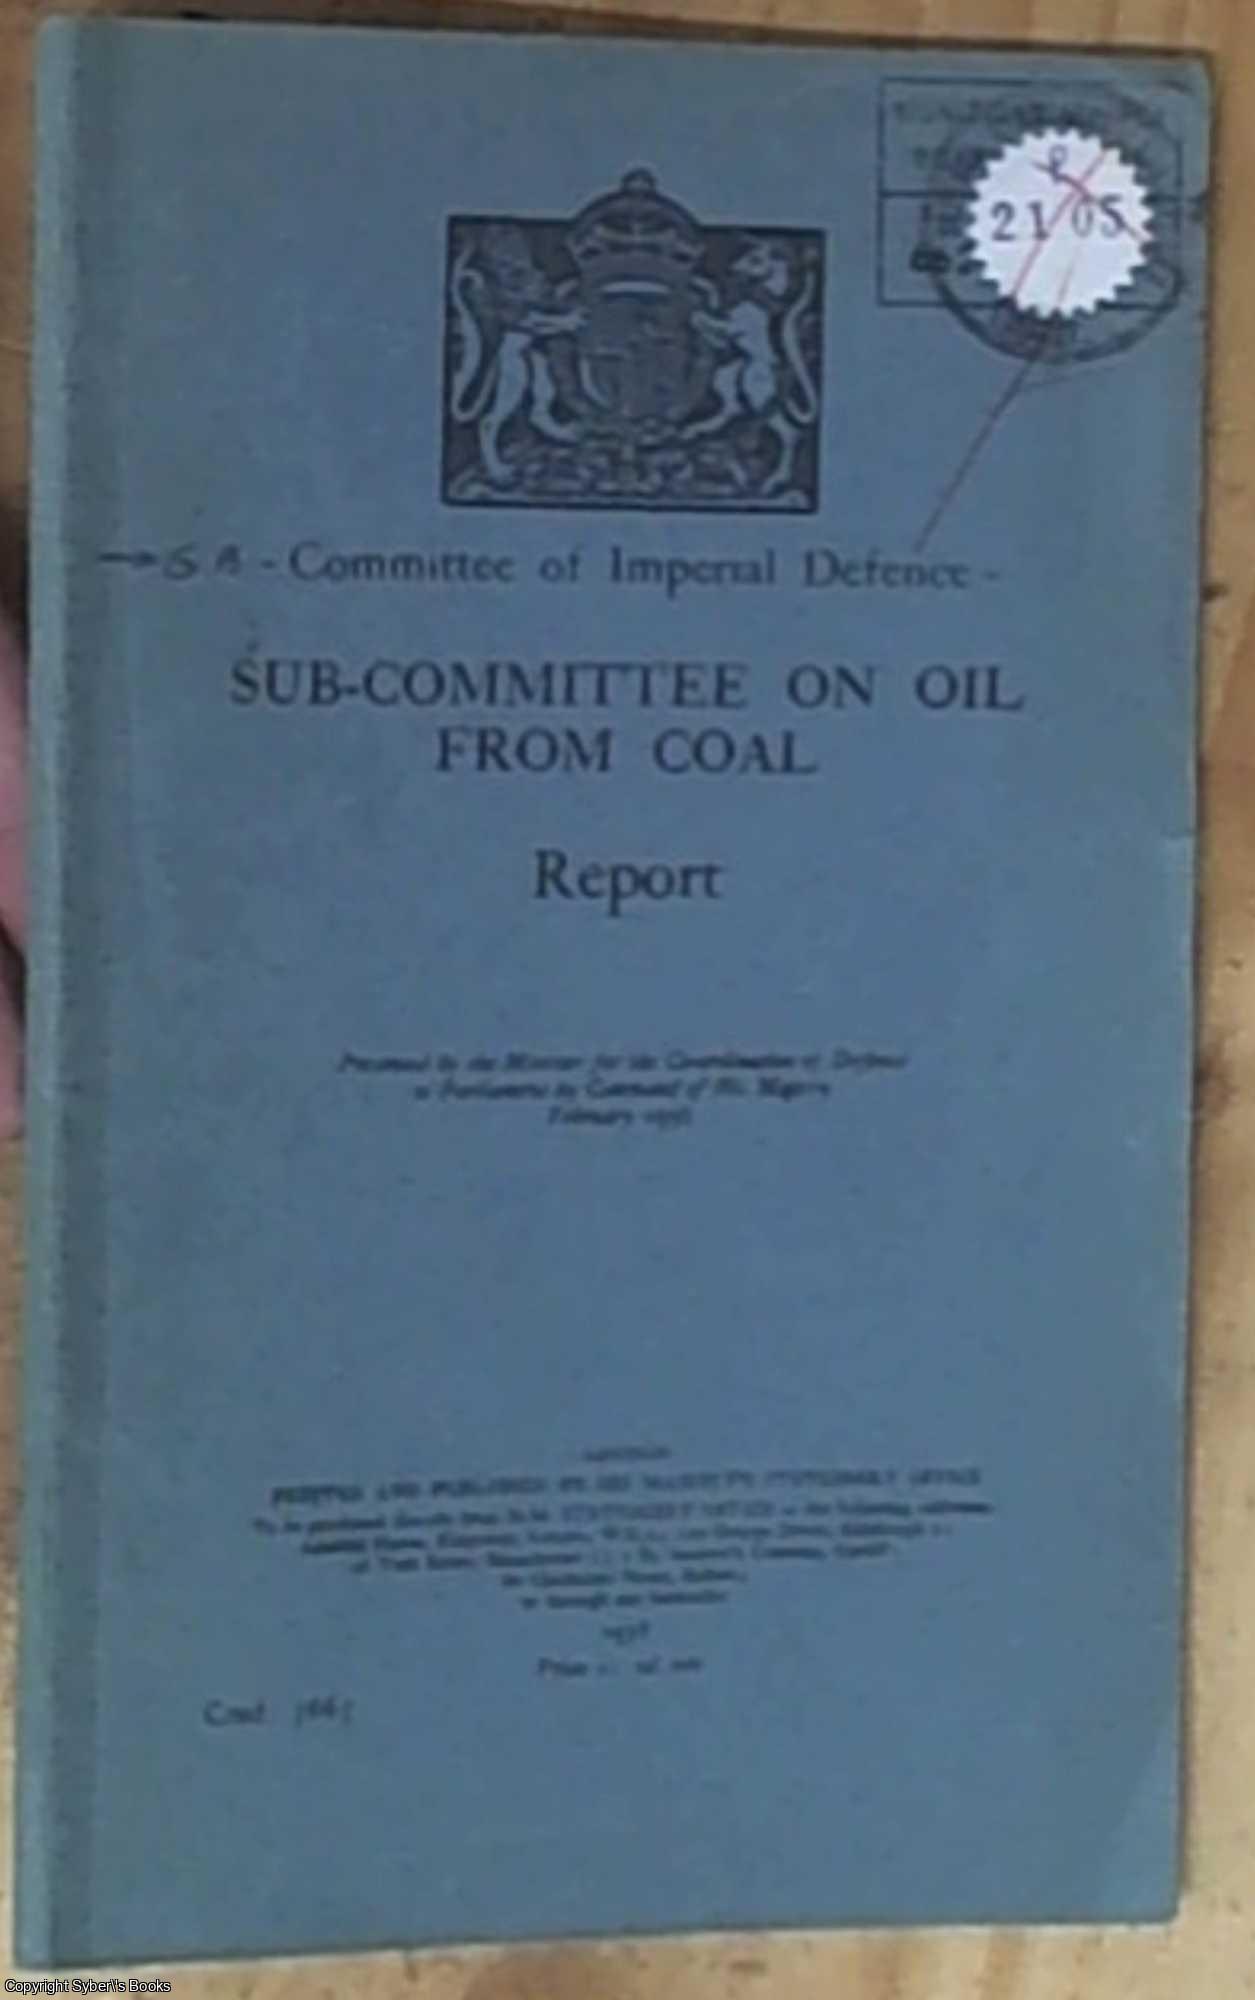 Committee of Imperial Defence - Sub- Committee on Oil from Coal  Report